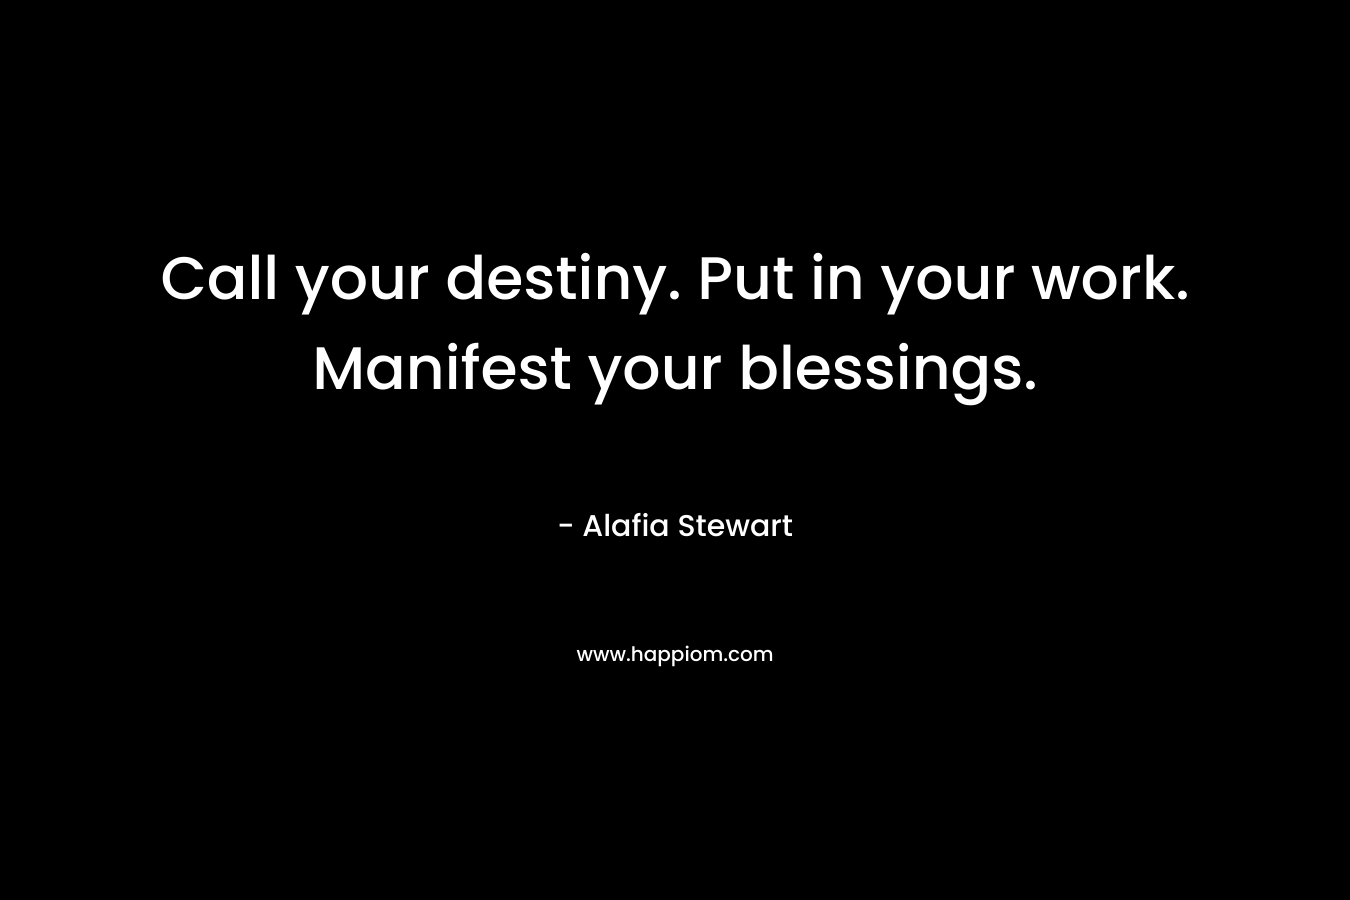 Call your destiny. Put in your work. Manifest your blessings.